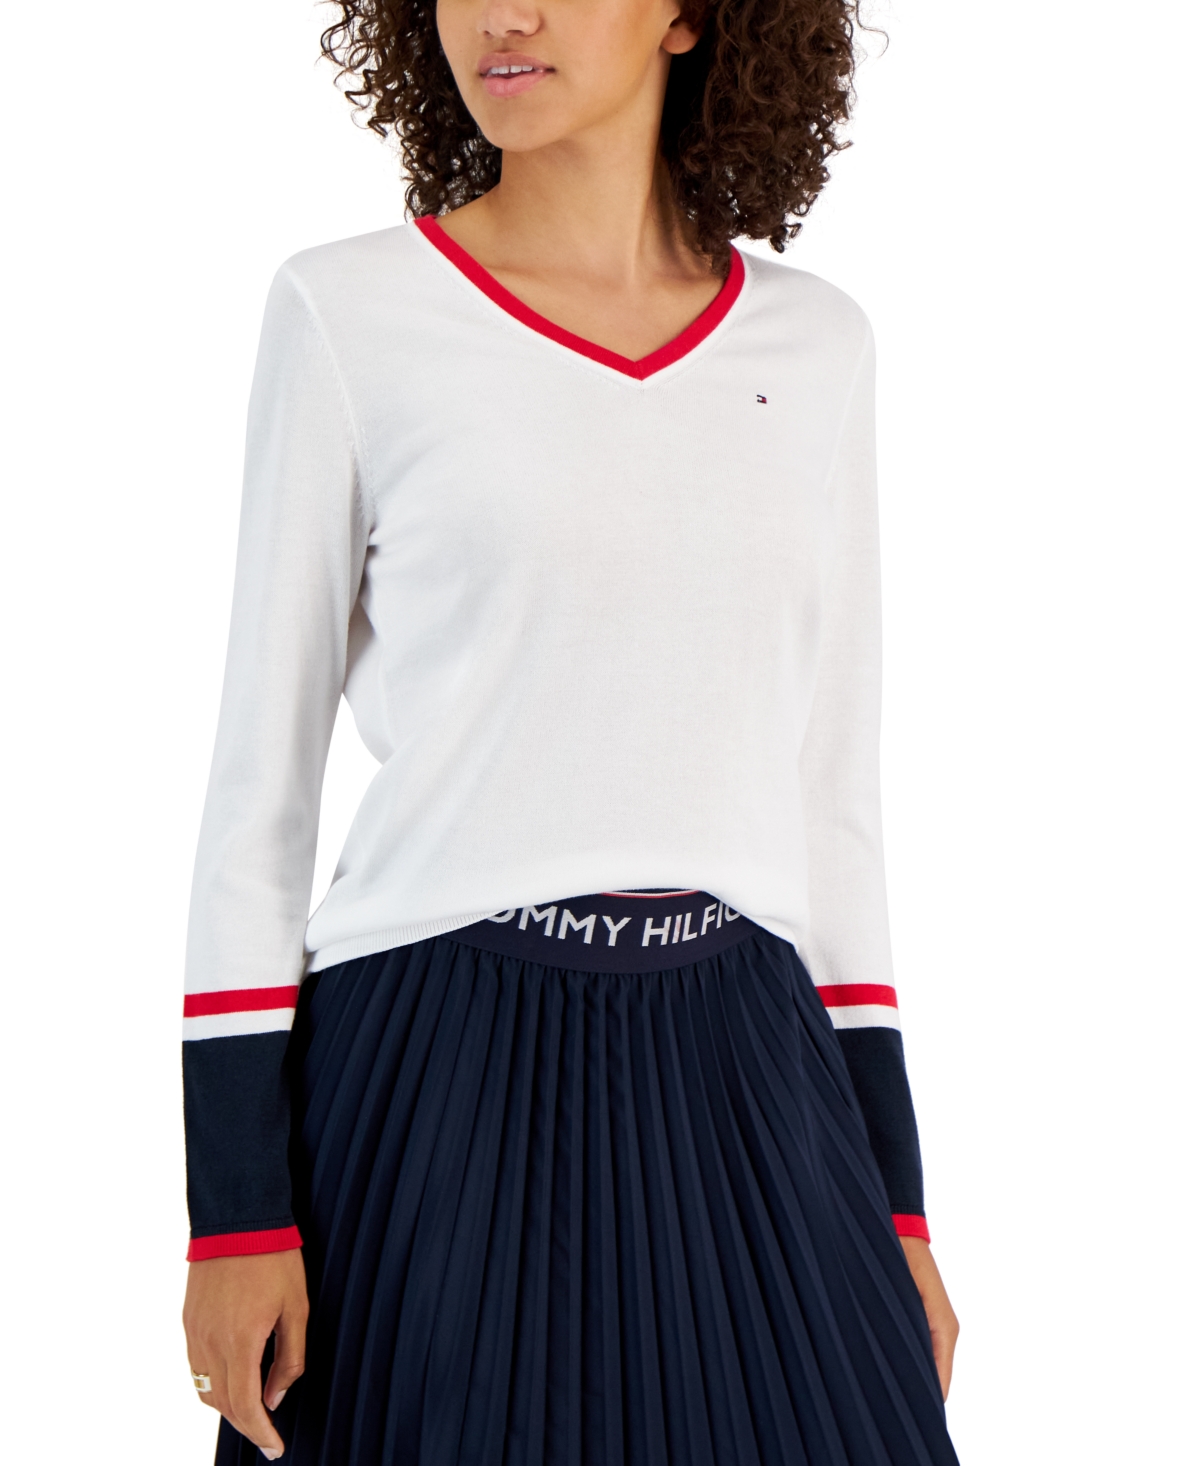 Tommy Hilfiger Women's Ivy Cotton V-Neck Tipped Sleeve Sweater